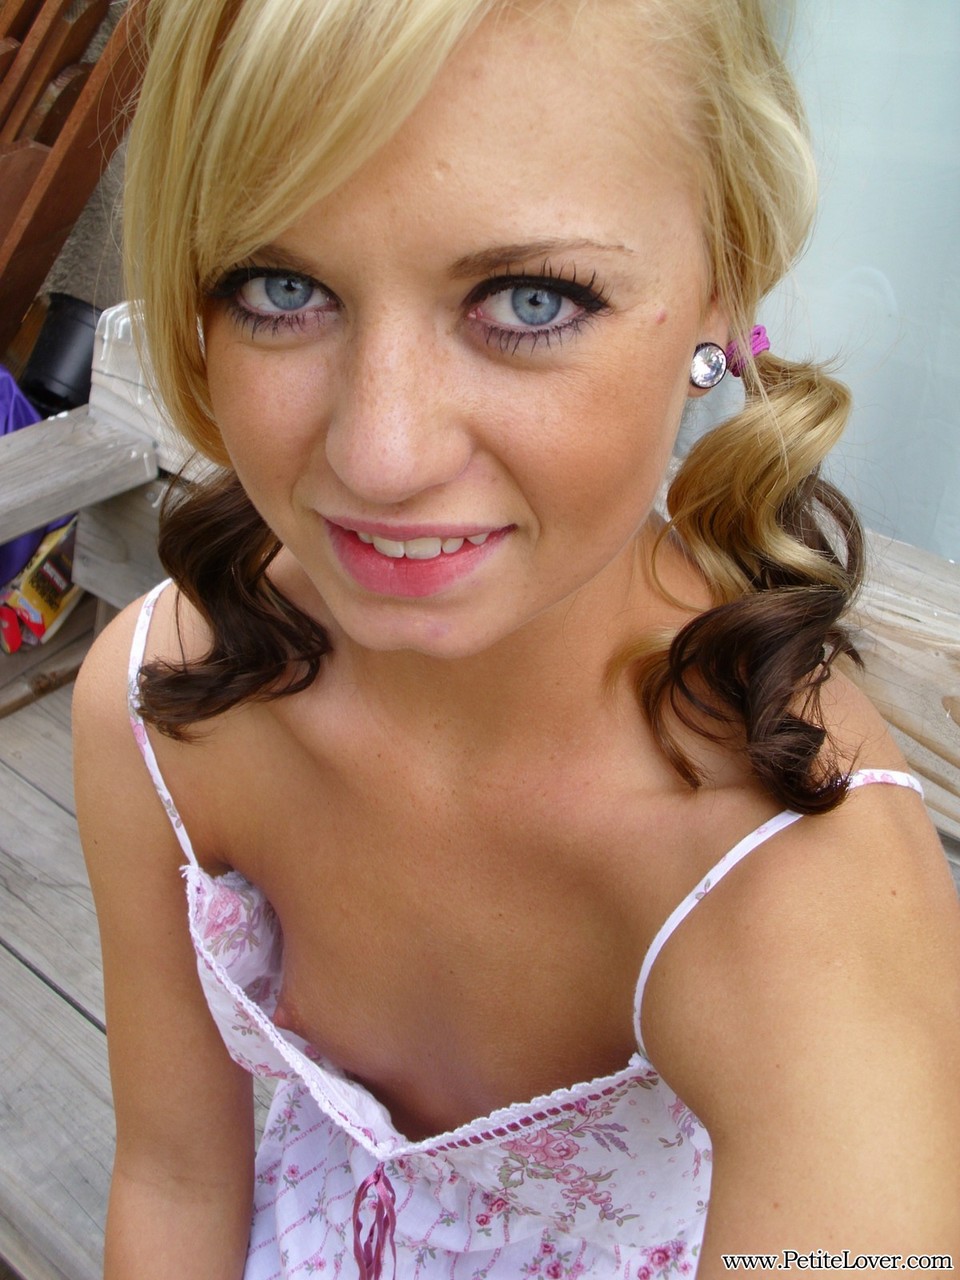 Cute blonde Tiff in pigtails showing off her wee small tits & tiny bald pussy foto porno #428478635 | Petite Lover Pics, Tiff, Amateur, porno móvil